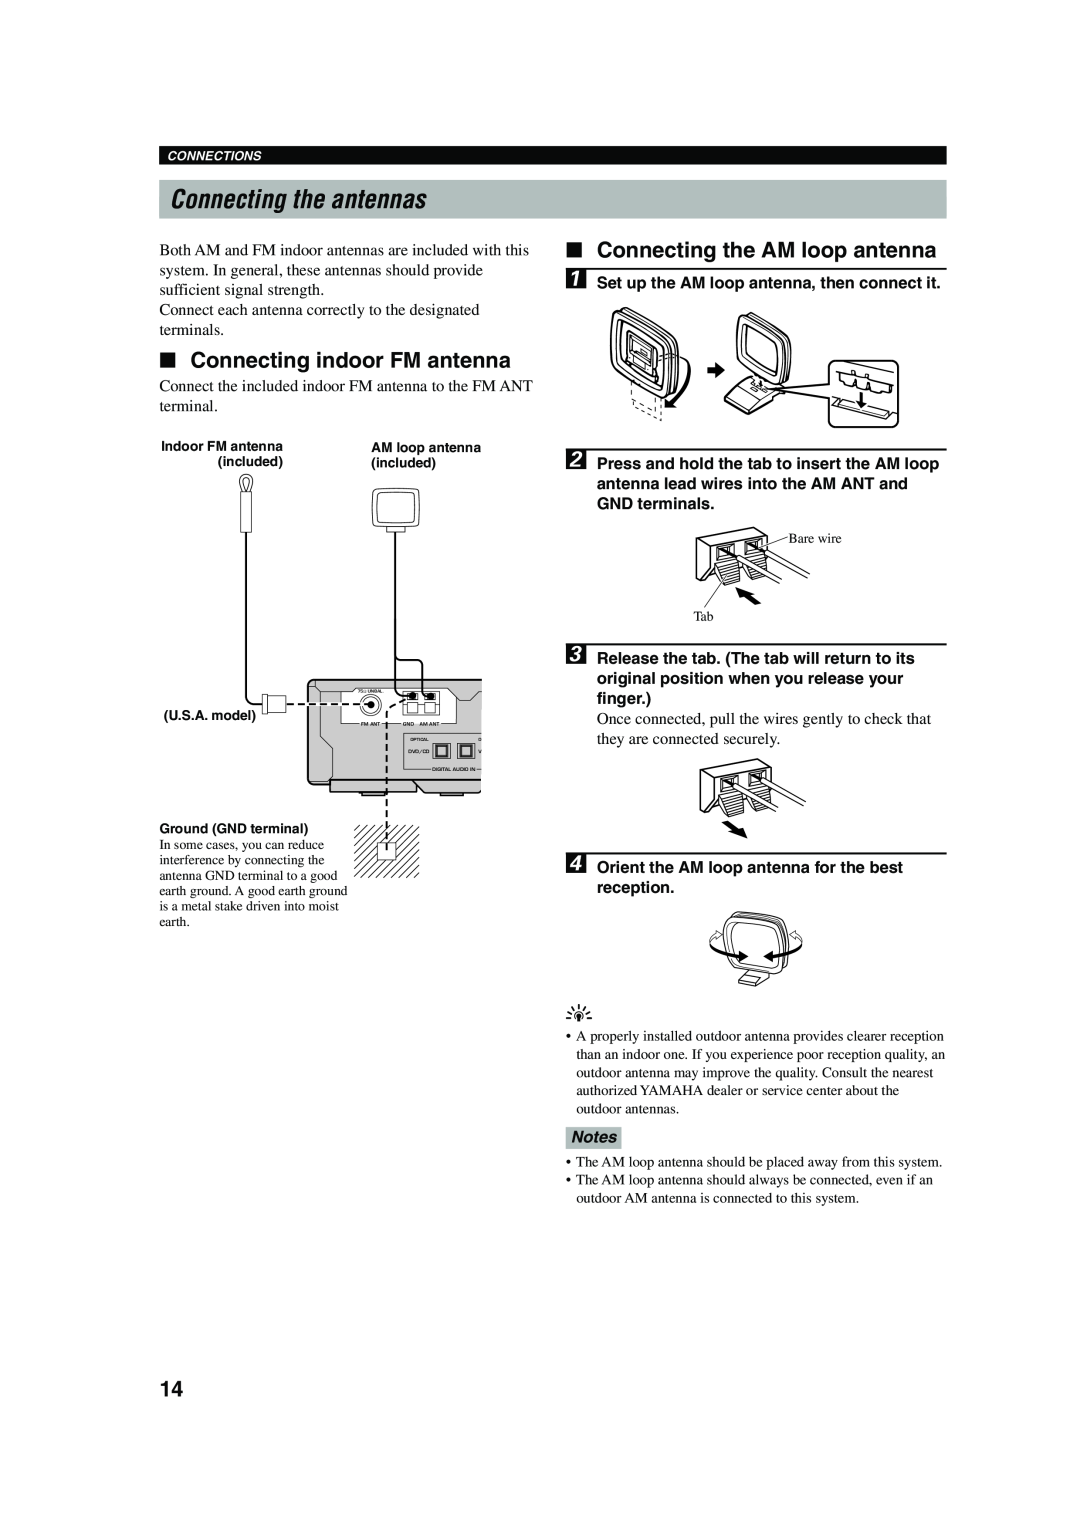 Yamaha AVX-S80 owner manual Connecting the antennas, Connecting indoor FM antenna, Connecting the AM loop antenna, Notes 